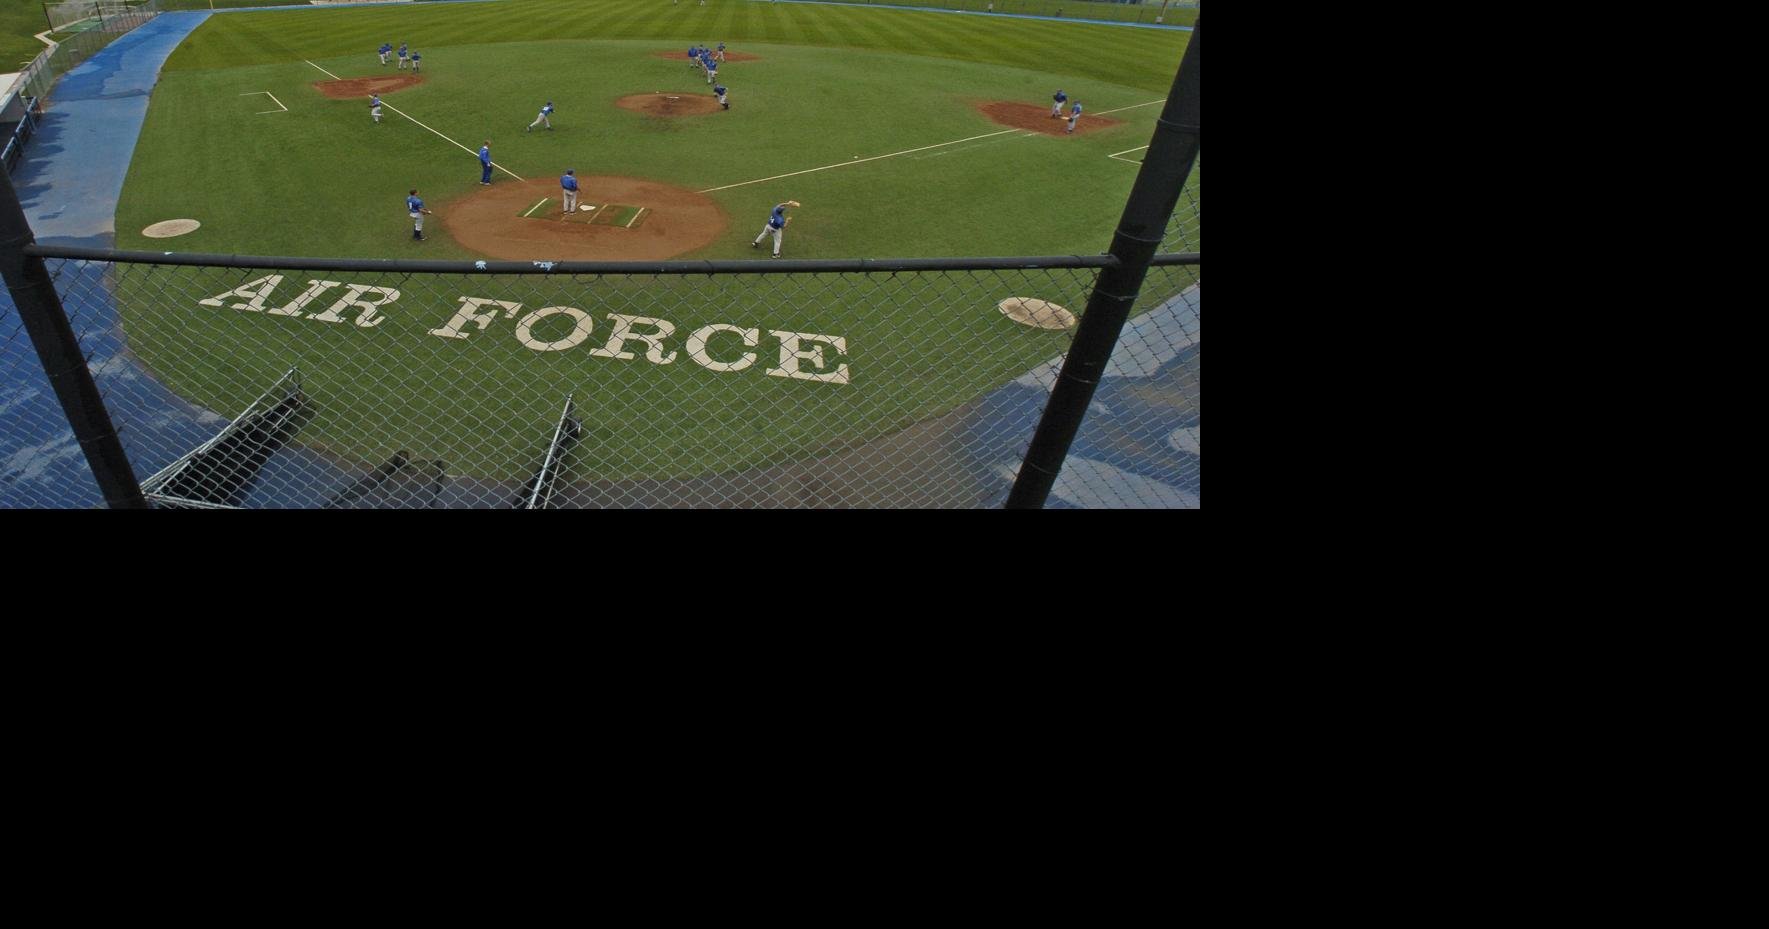 Air Force baseball receives 2.5 million donation that will bring